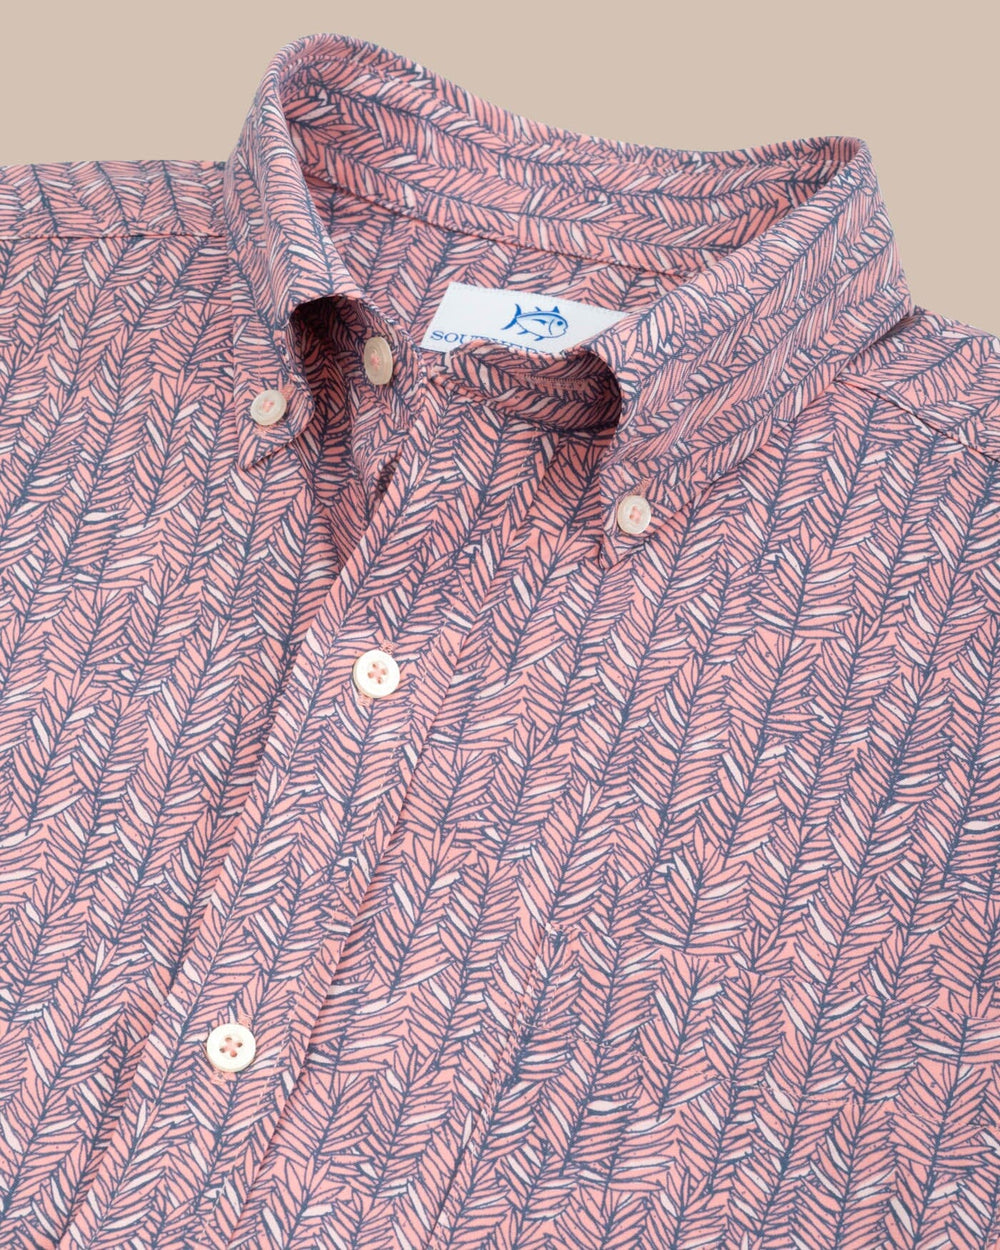 The detail view of the Southern Tide Leagally Frond Intercoastal Short Sleeve Sport Shirt by Southern Tide - Flamingo Pink